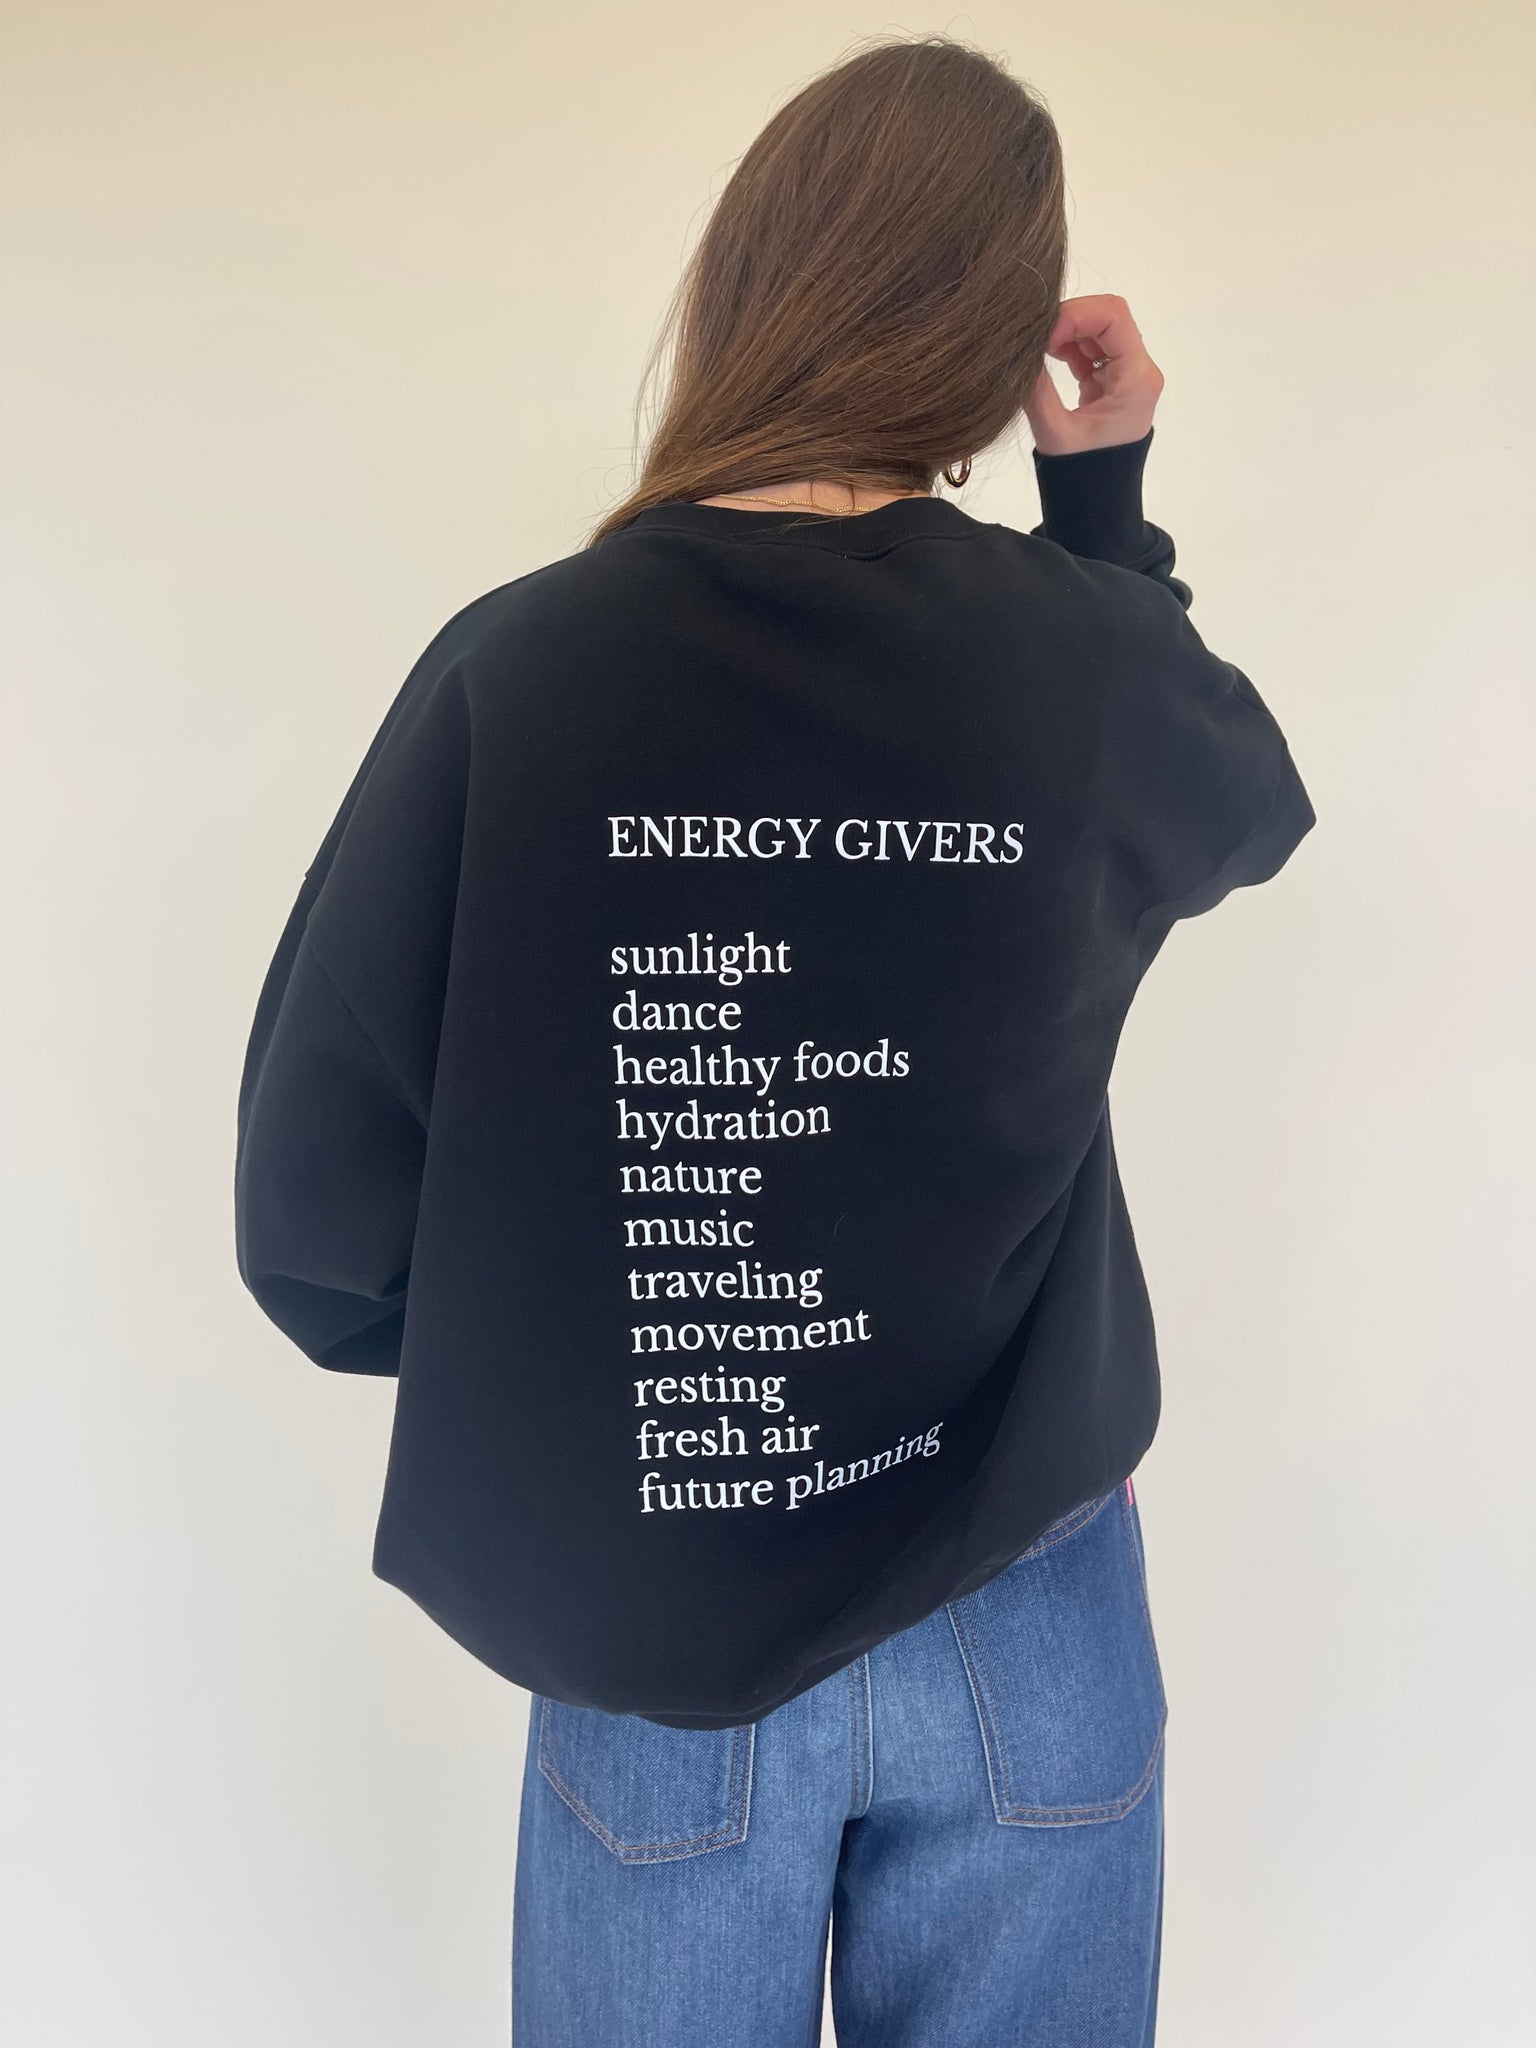 COOPER BLACK "ENERGY GIVERS"